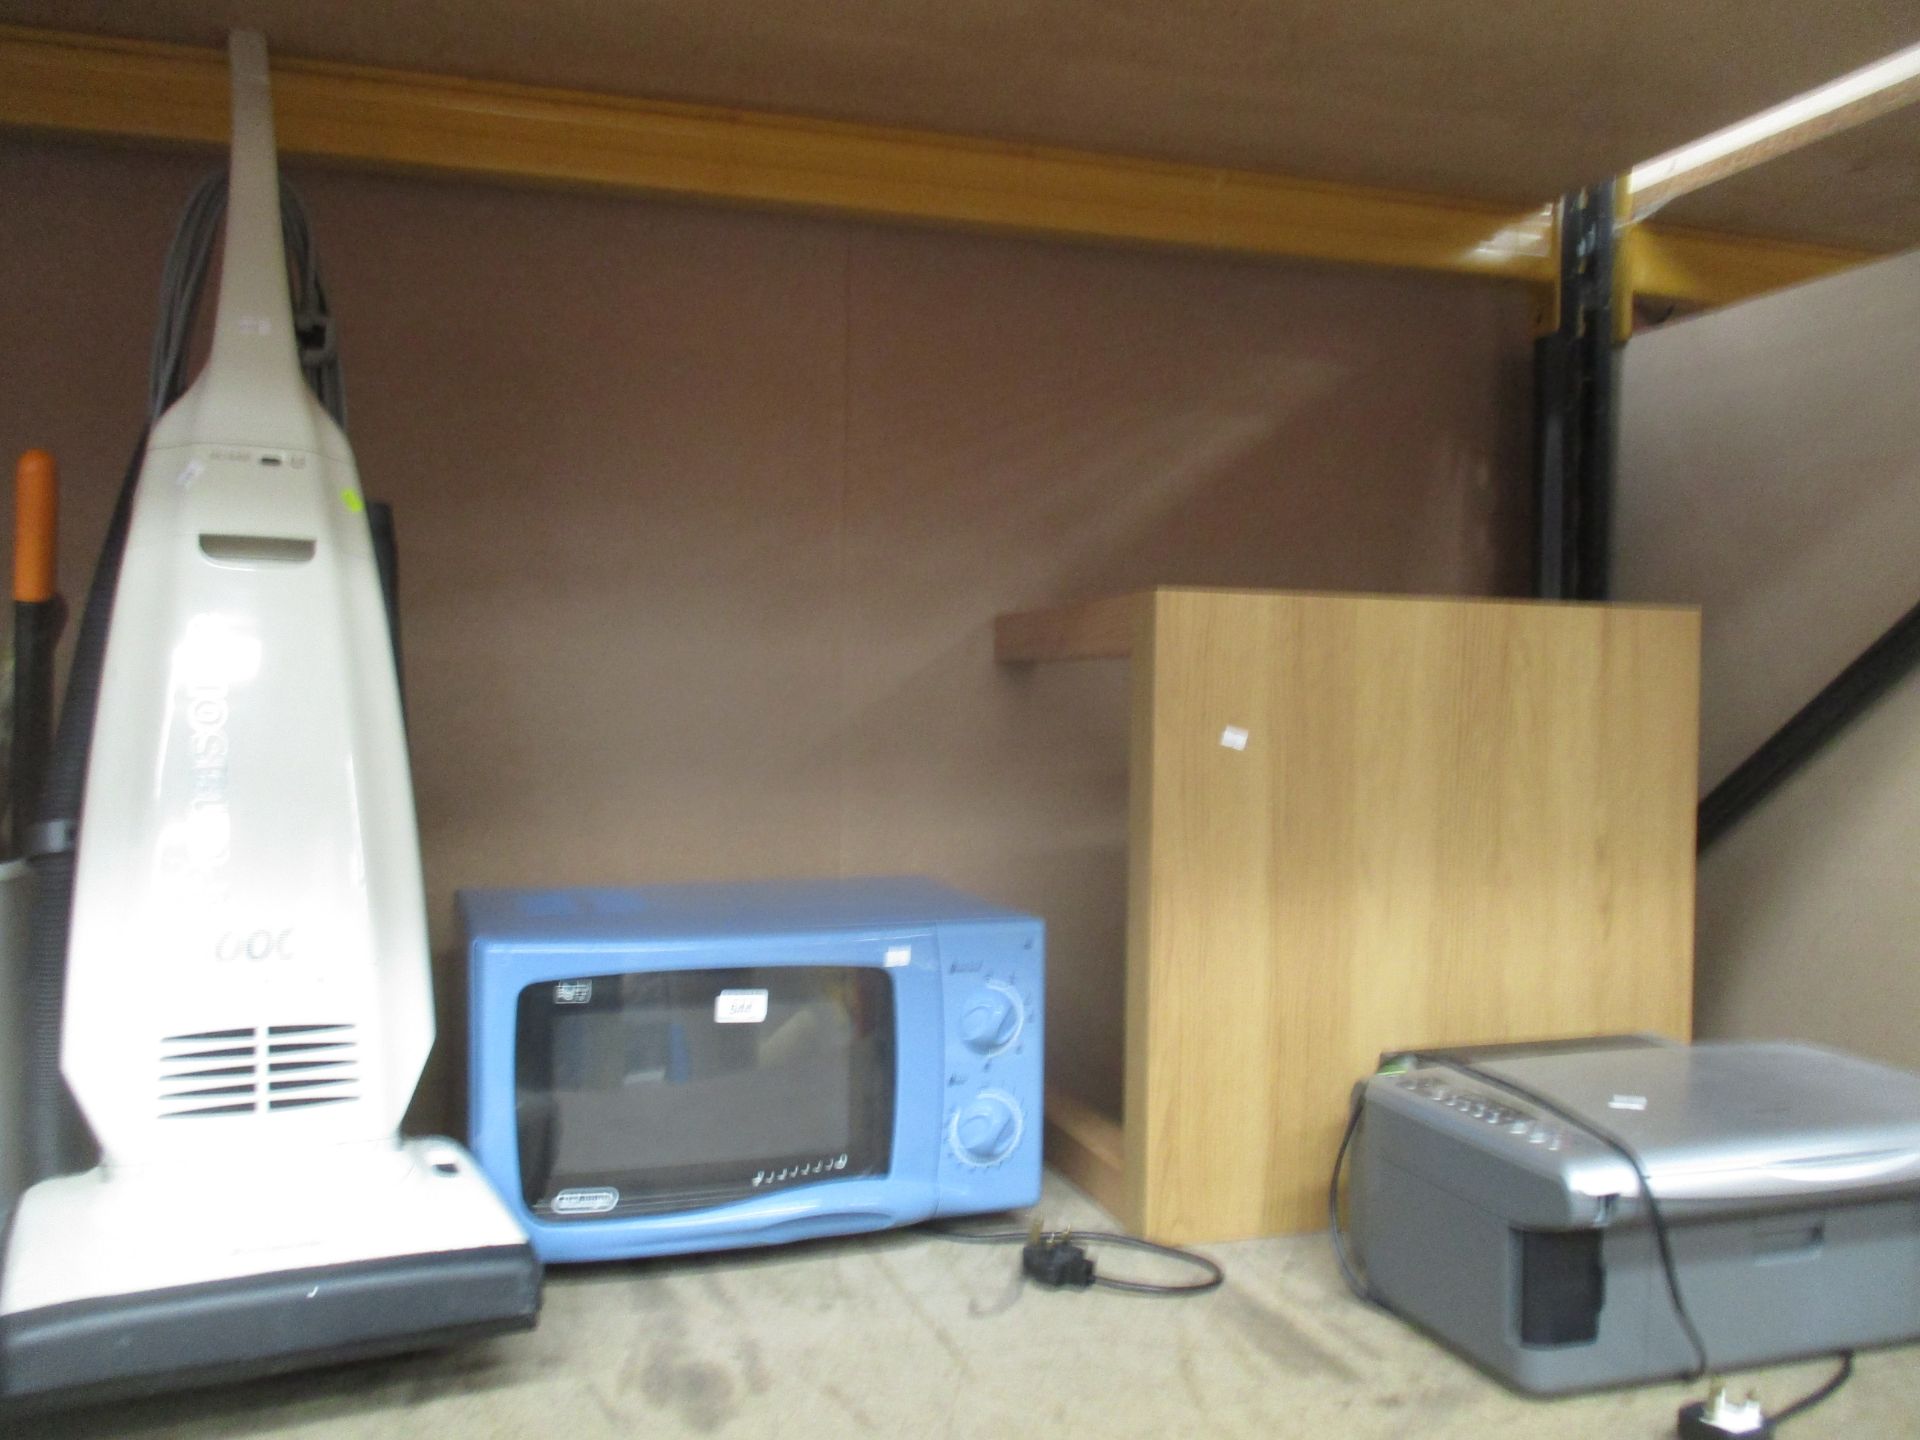 A Panasonic 1000w upright vacuum cleaner, a Delonghi microwave, oak finish coffee table and an Epson